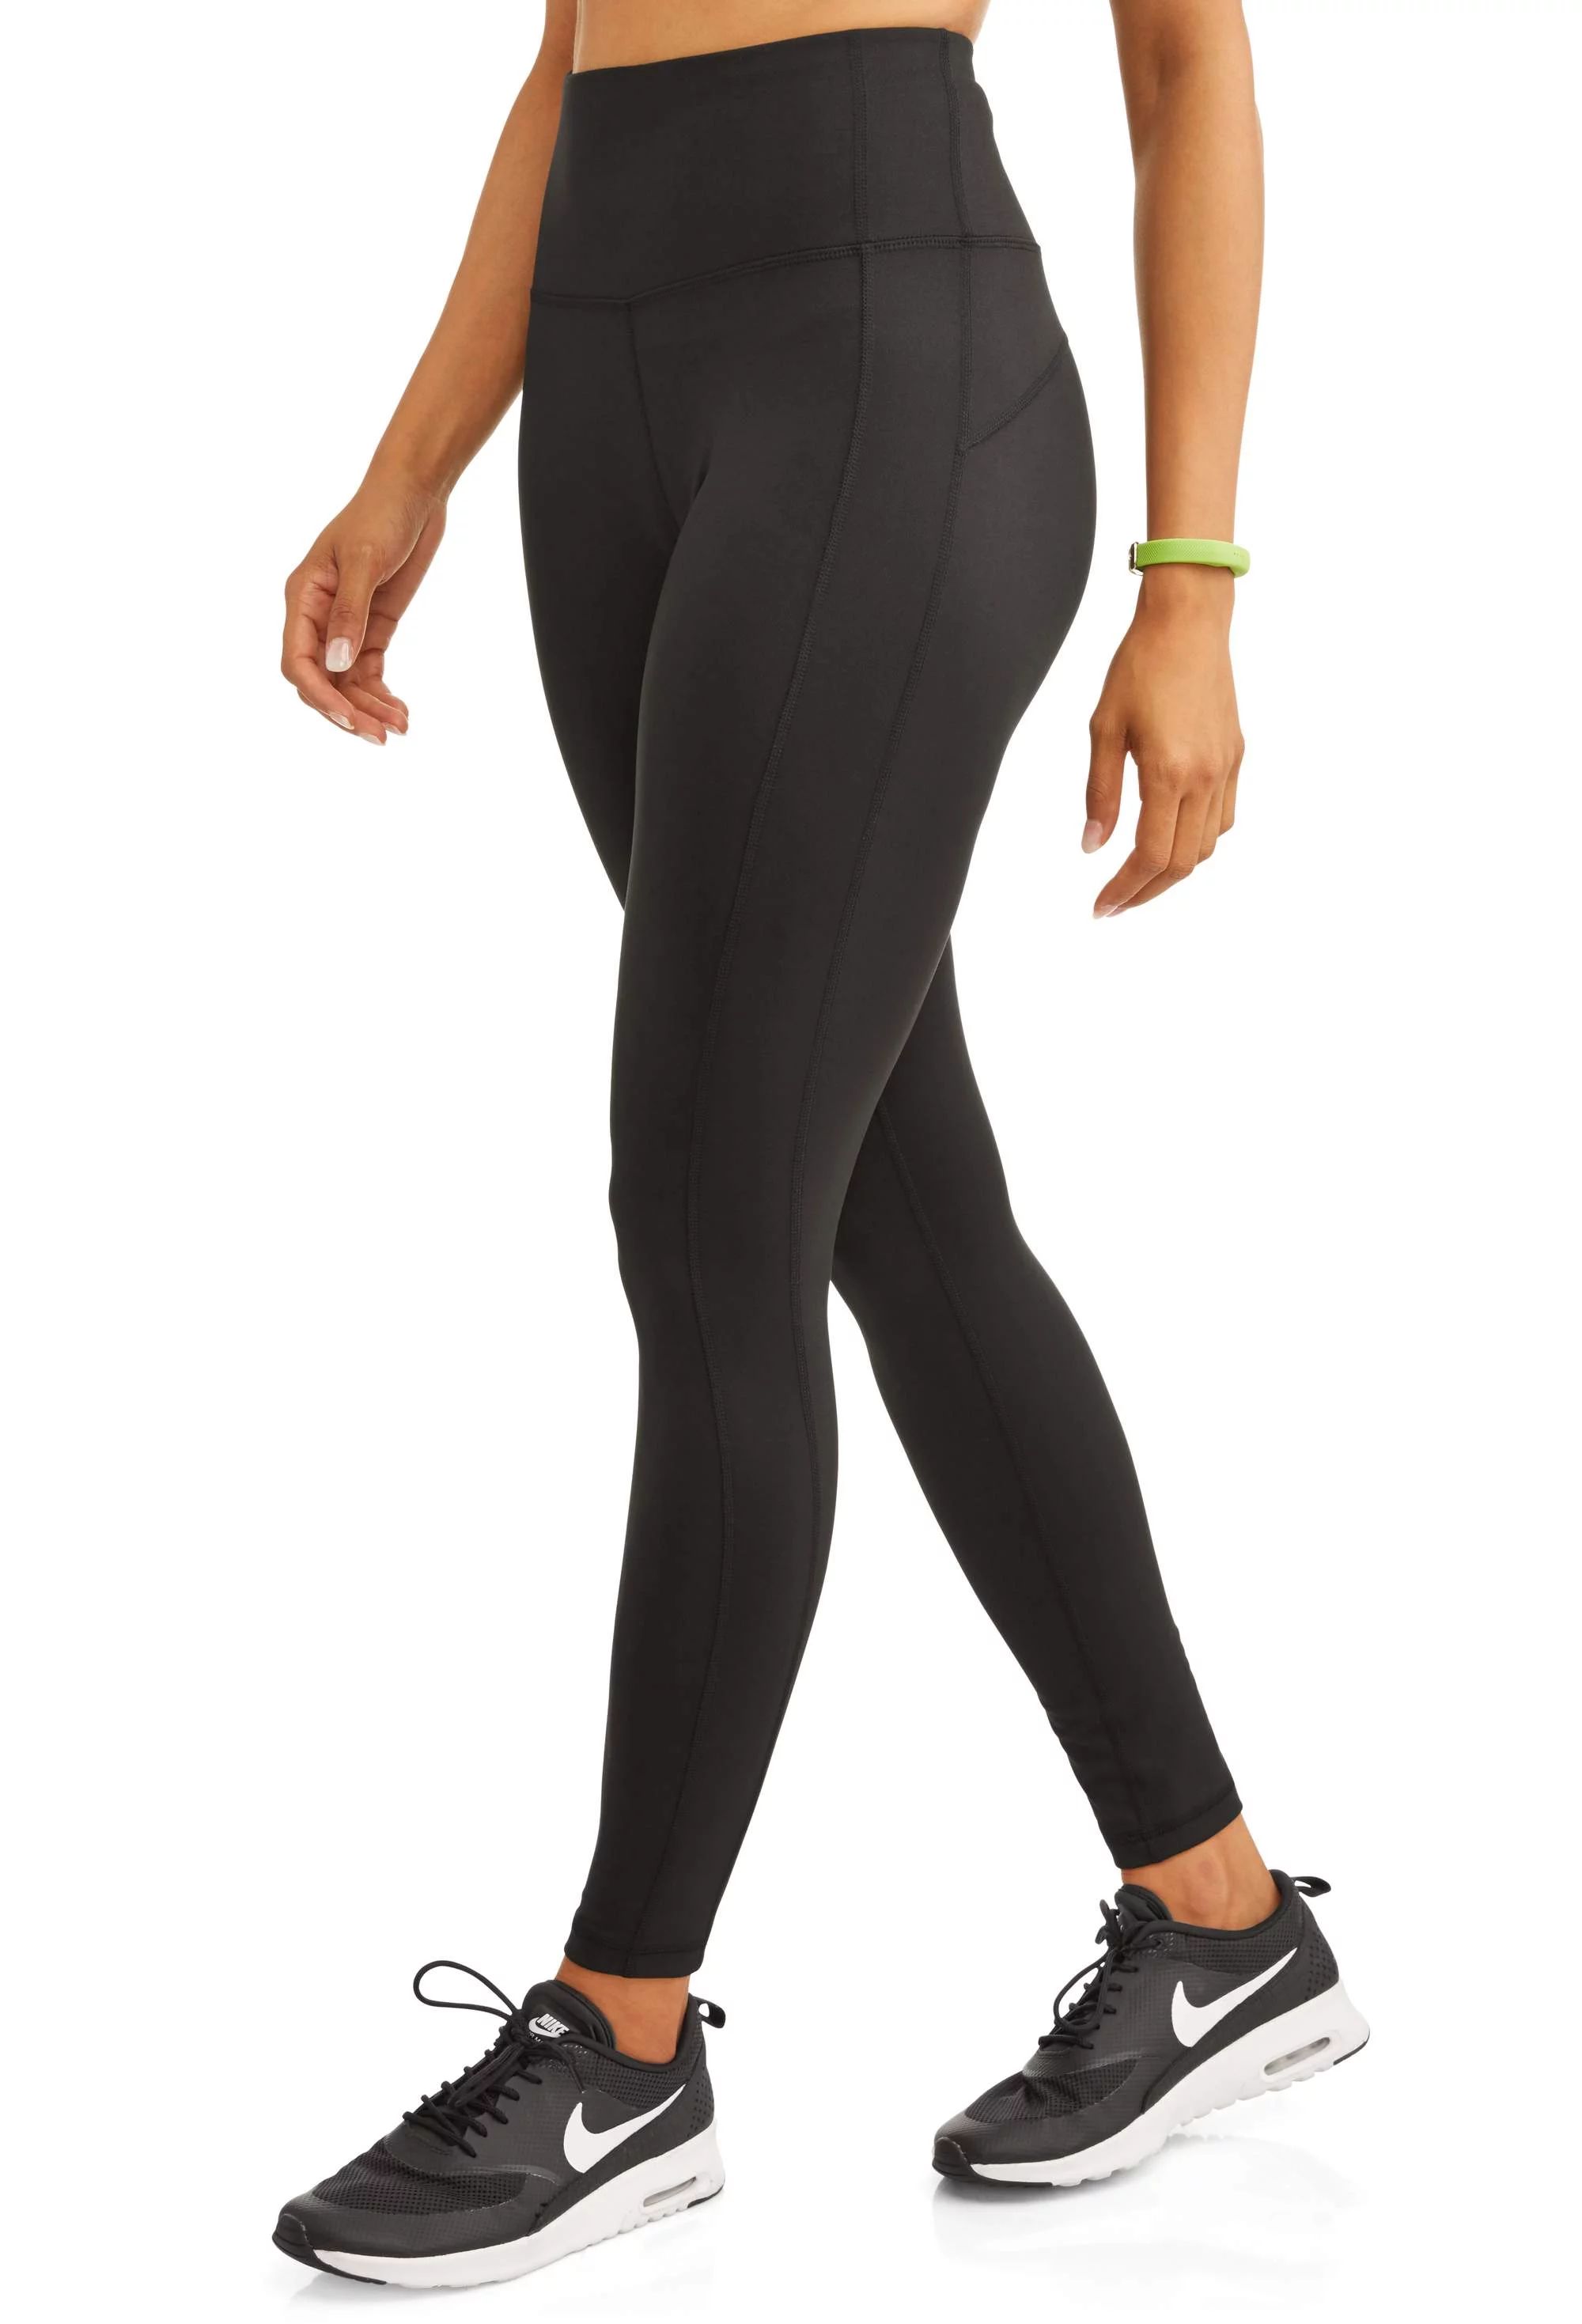 Avia Women's Performance Ankle Tights with Side Pockets | Walmart (US)